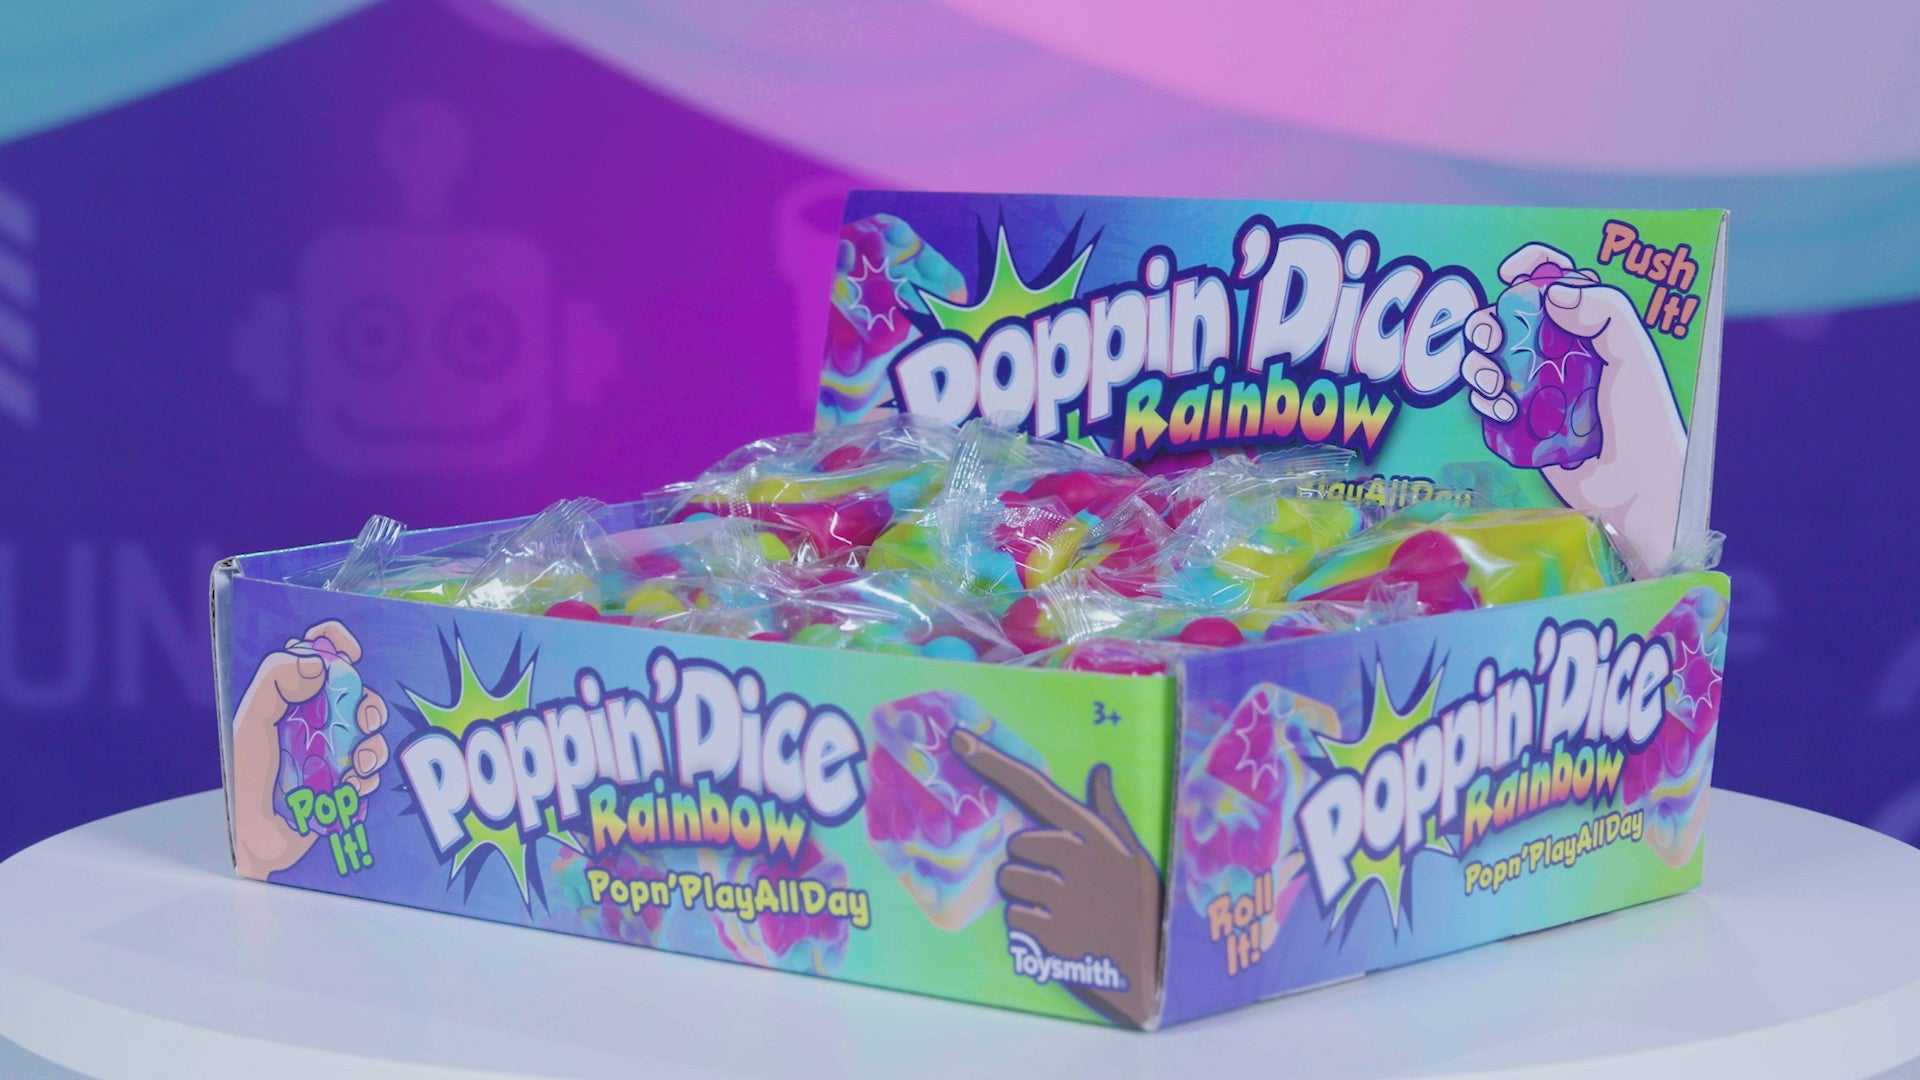 A video showing rainbow poppin' dice in packaging and in use